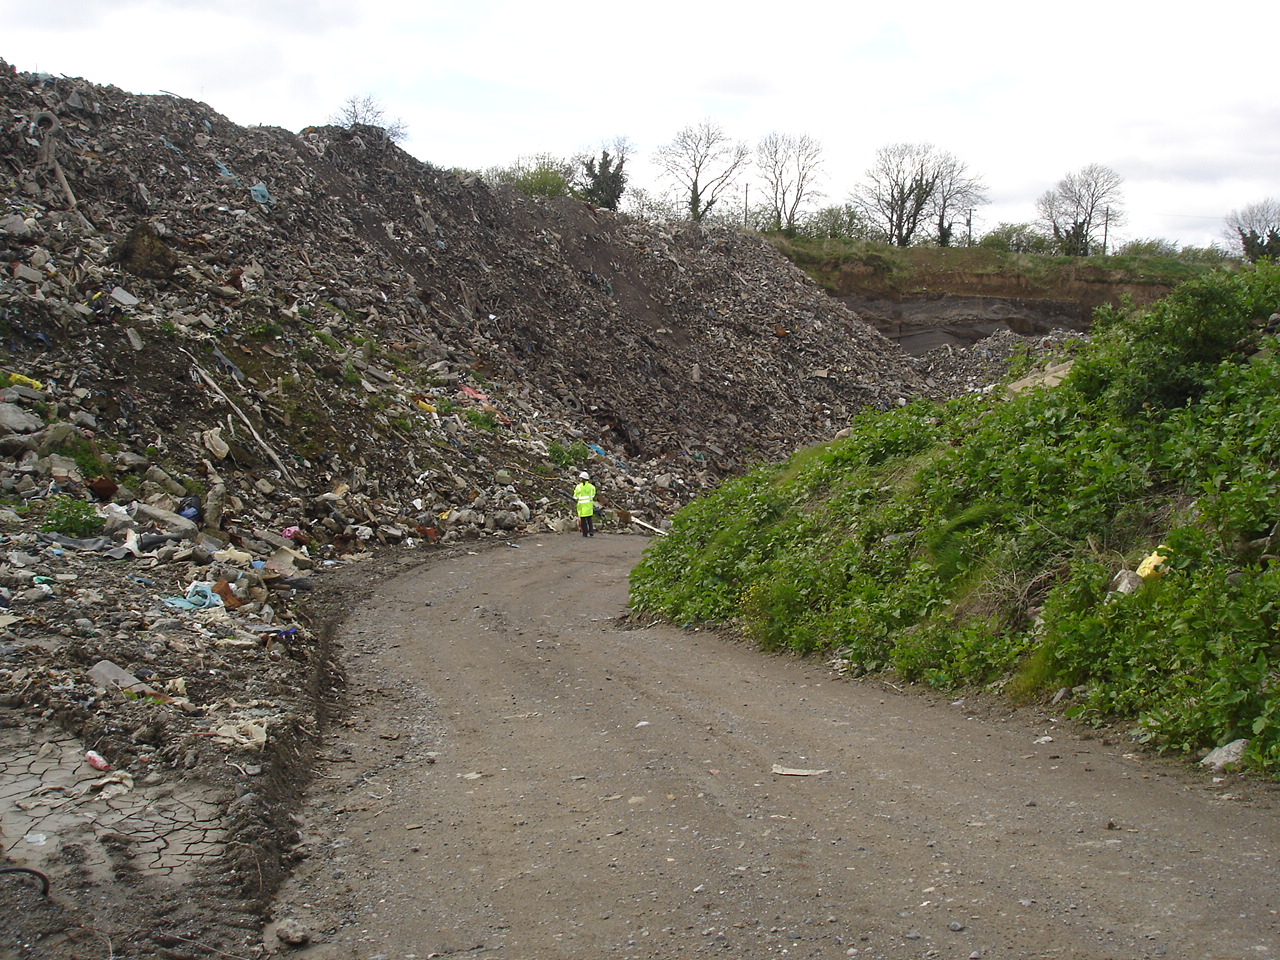 illegal landfill image with EPA staff member in background